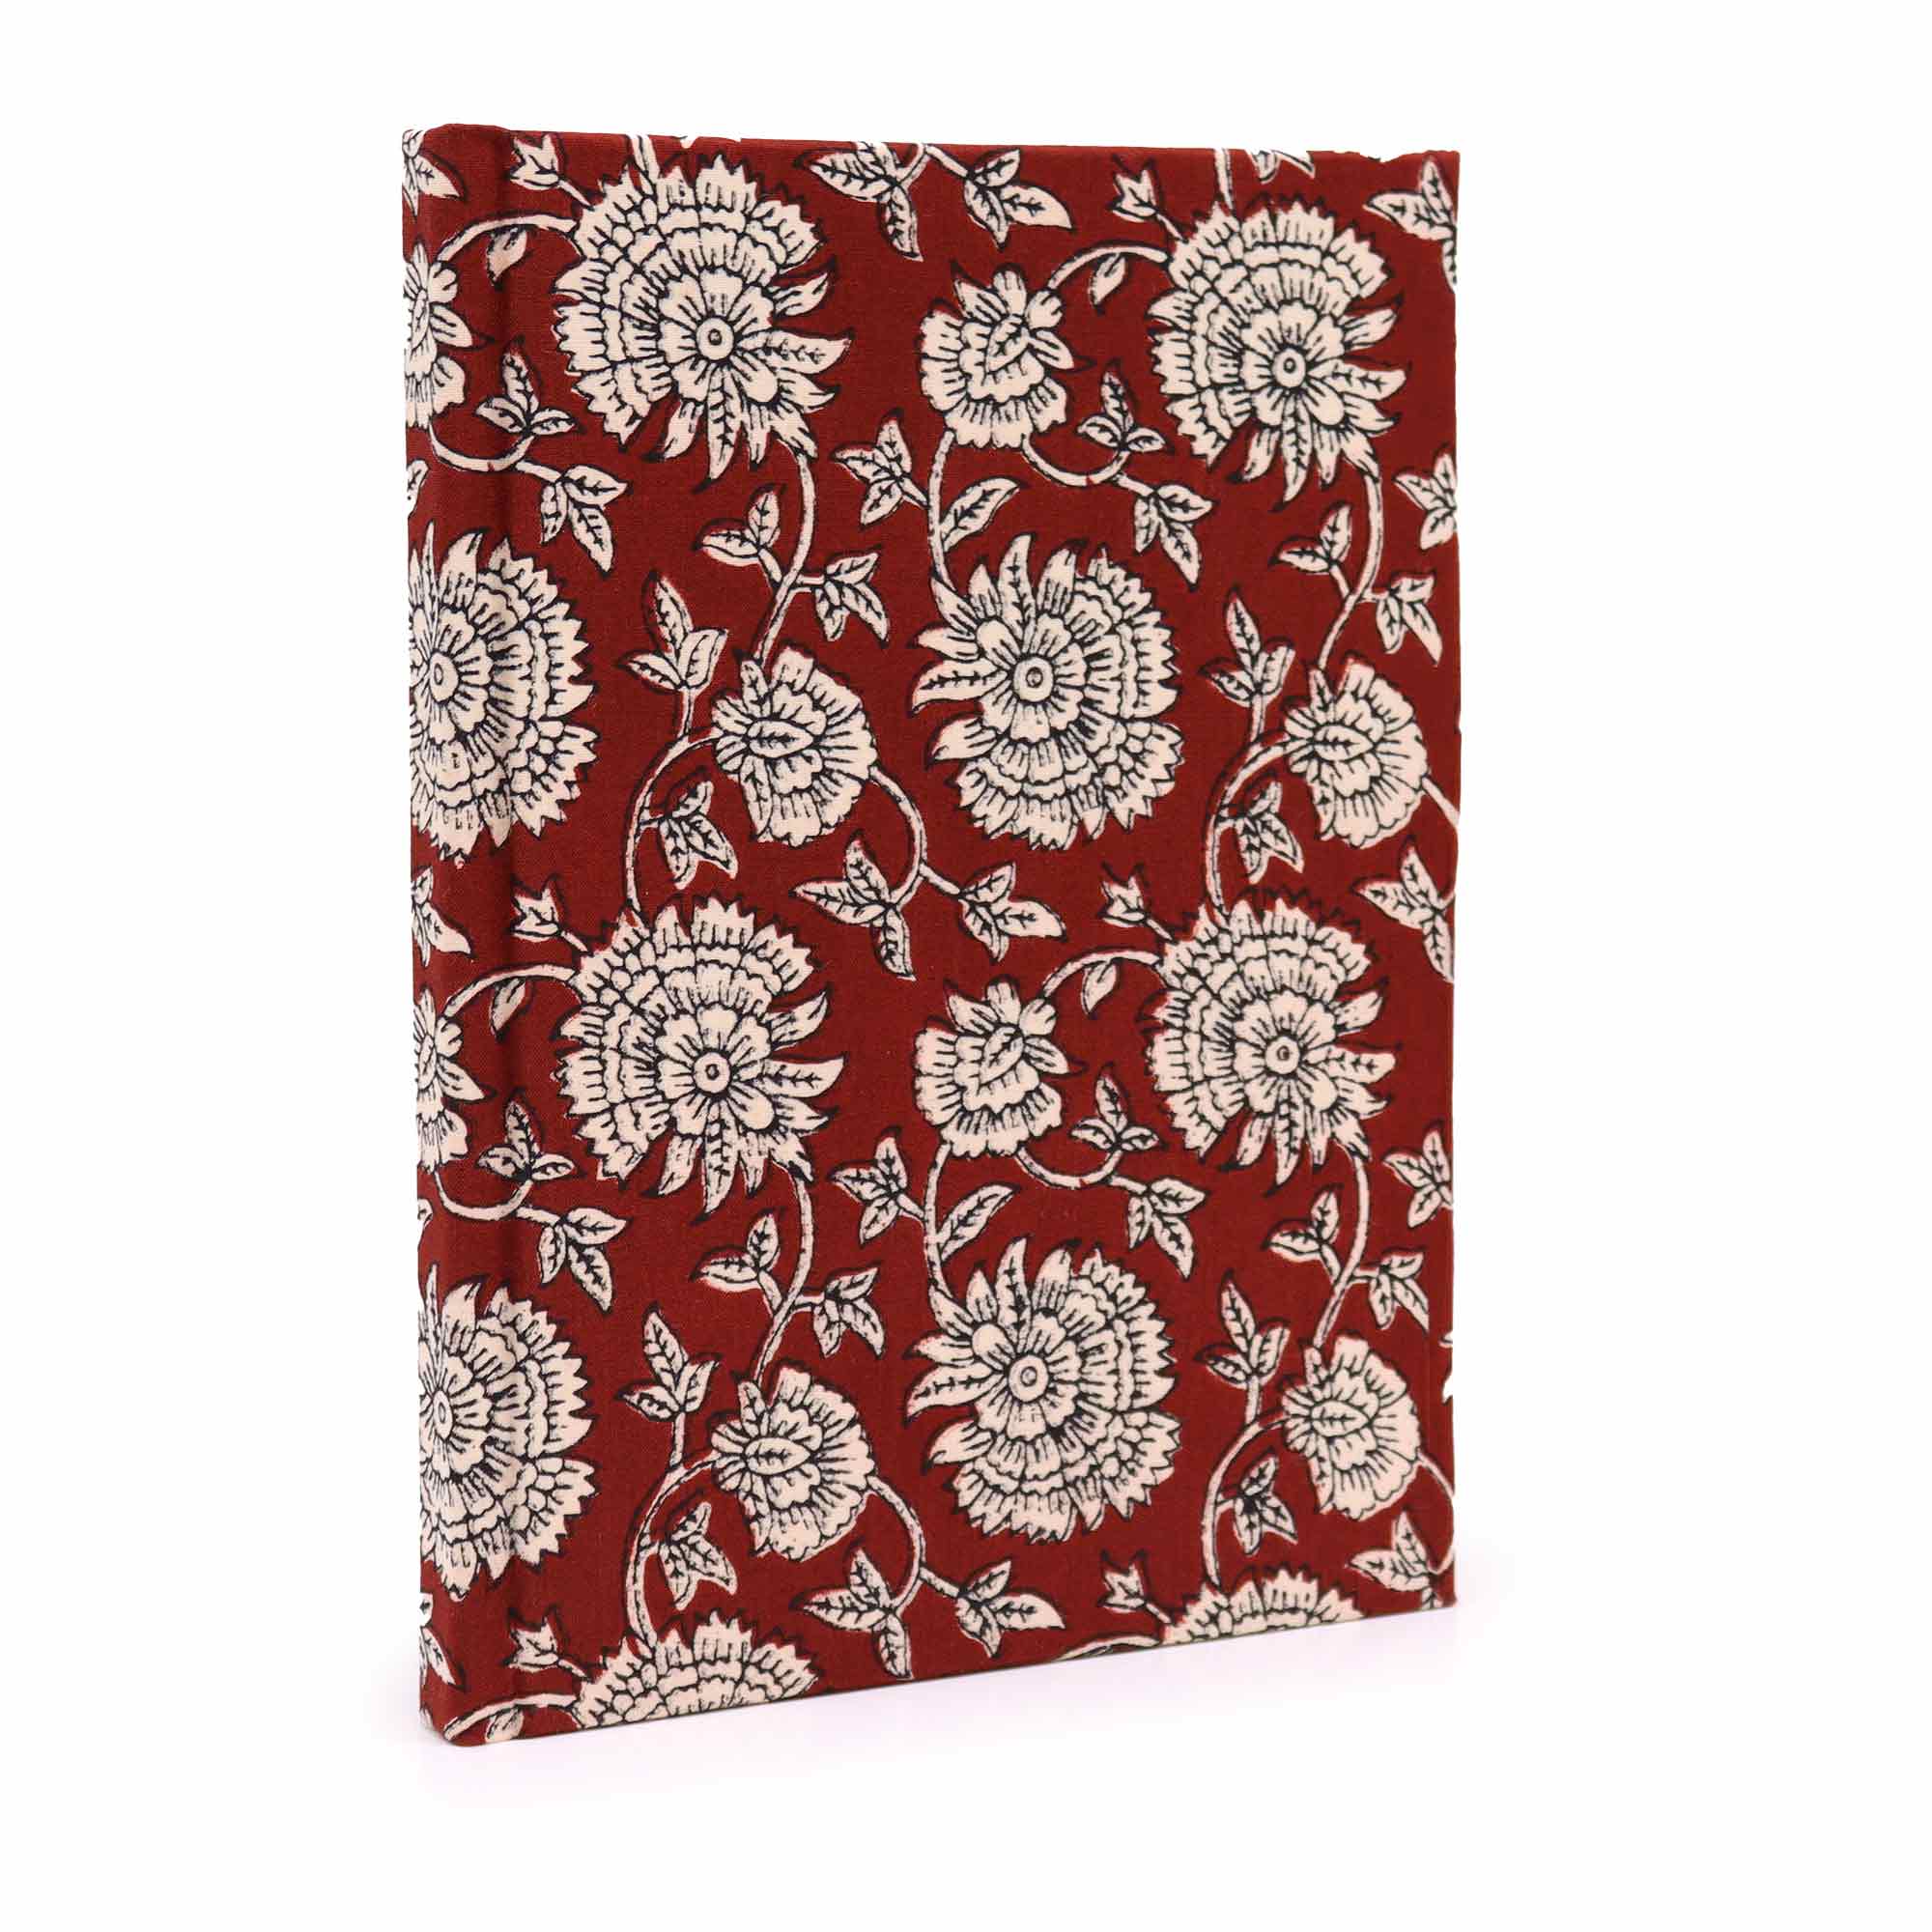 Cotton Bound Notebooks 20x15cm - 96 pages - Burgundy Floral